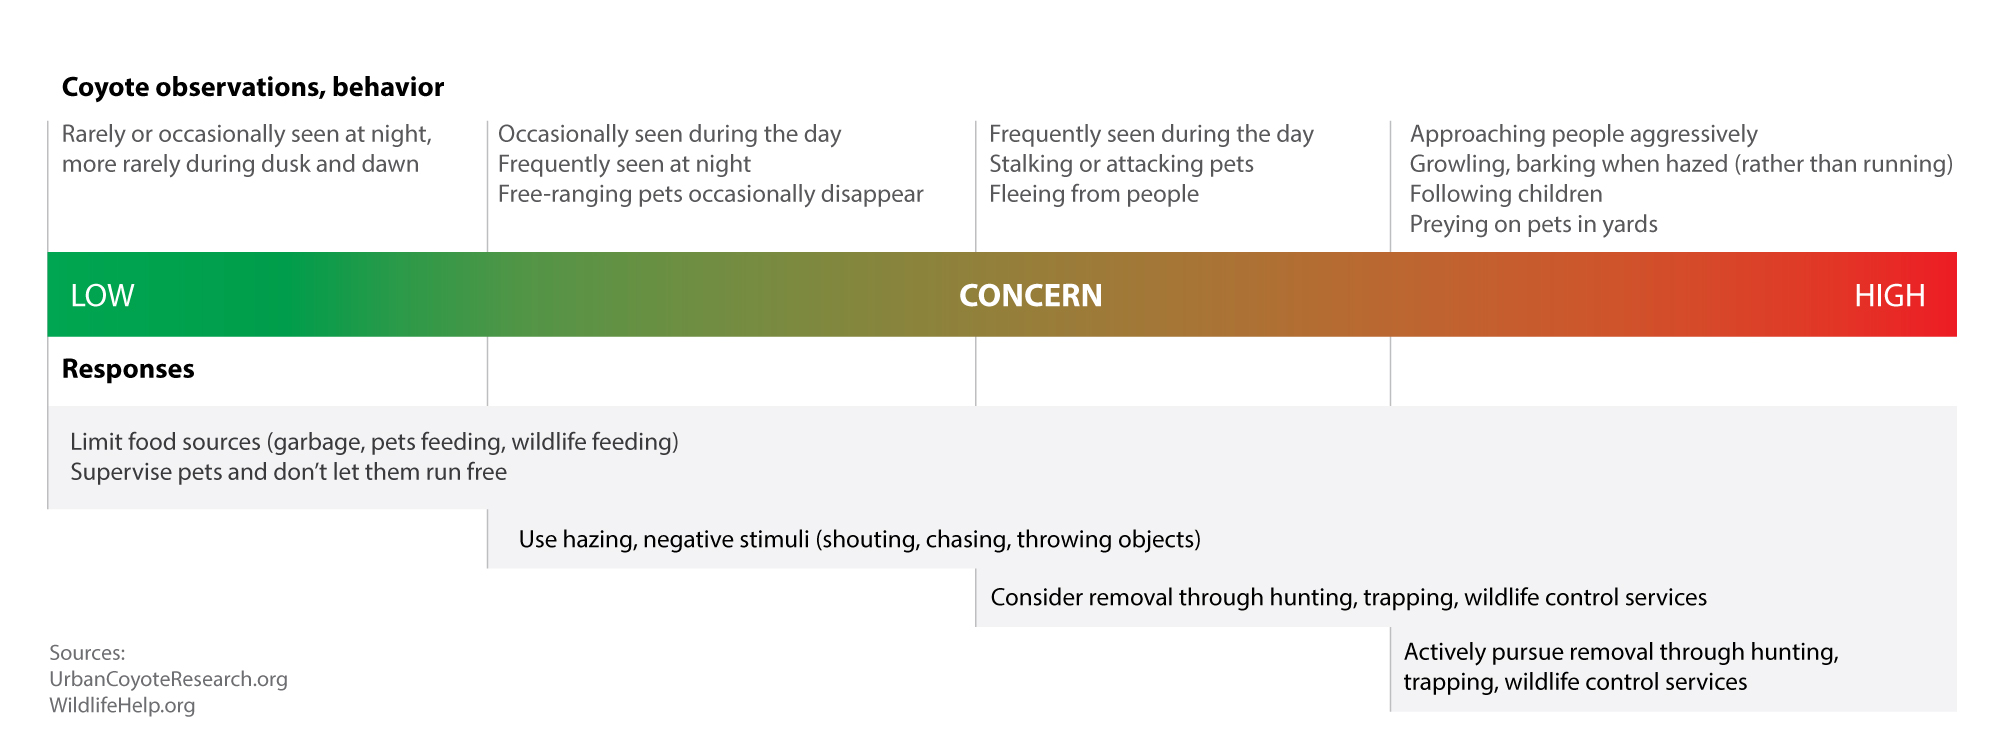 Diagram showing coyote threats and appropriate responses